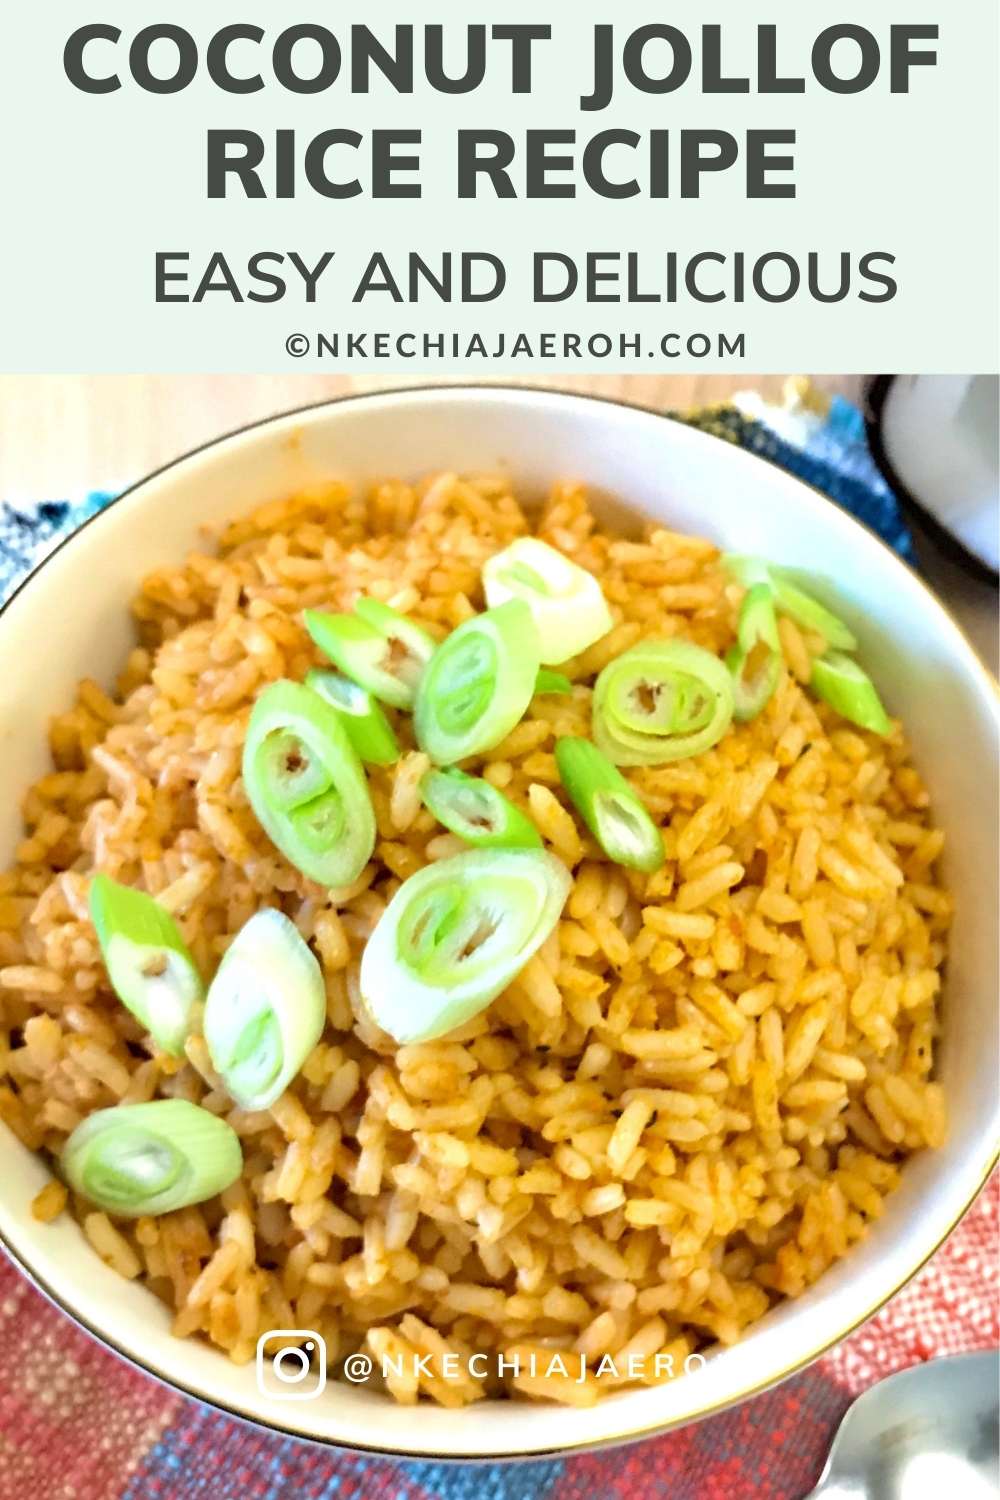 Nigerian Coconut Jollof Rice Recipe. Easy Step by Step instructions. Vegan, Gluten-free, and Delicious. Learn how to cook foolproof coconut Jollof rice like a pro. Jollof rice is a must-have during Thanksgiving, Christmas, Easter, wedding, baby naming ceremony, anniversary for most Africans. Usually, Coconut Jollof with chicken or fish is very popular on-demand as well. #Jollofrice #Jollof #NigerianJollofrice #Africanfood #Sidedish #Vegan #WestAfrica #lunch #Dinner #ethnicfood #Nigerianfood 